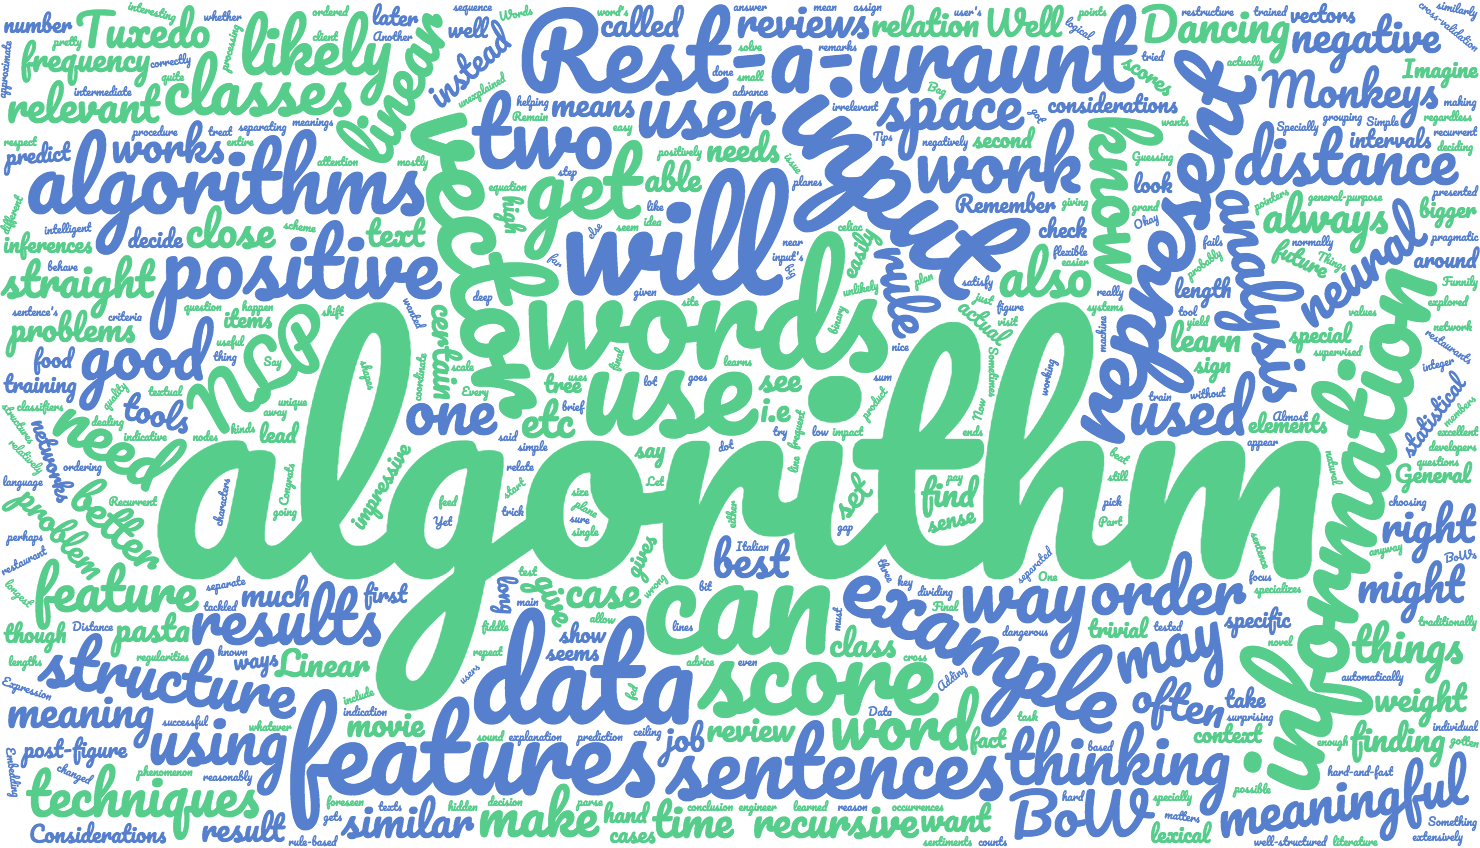 /assets/blog/2017-08-10-finding-the-right-representation-for-your-nlp-data/2017-08-10-finding-the-right-representation-for-your-nlp-data-wordcloud-5f170012c7.png